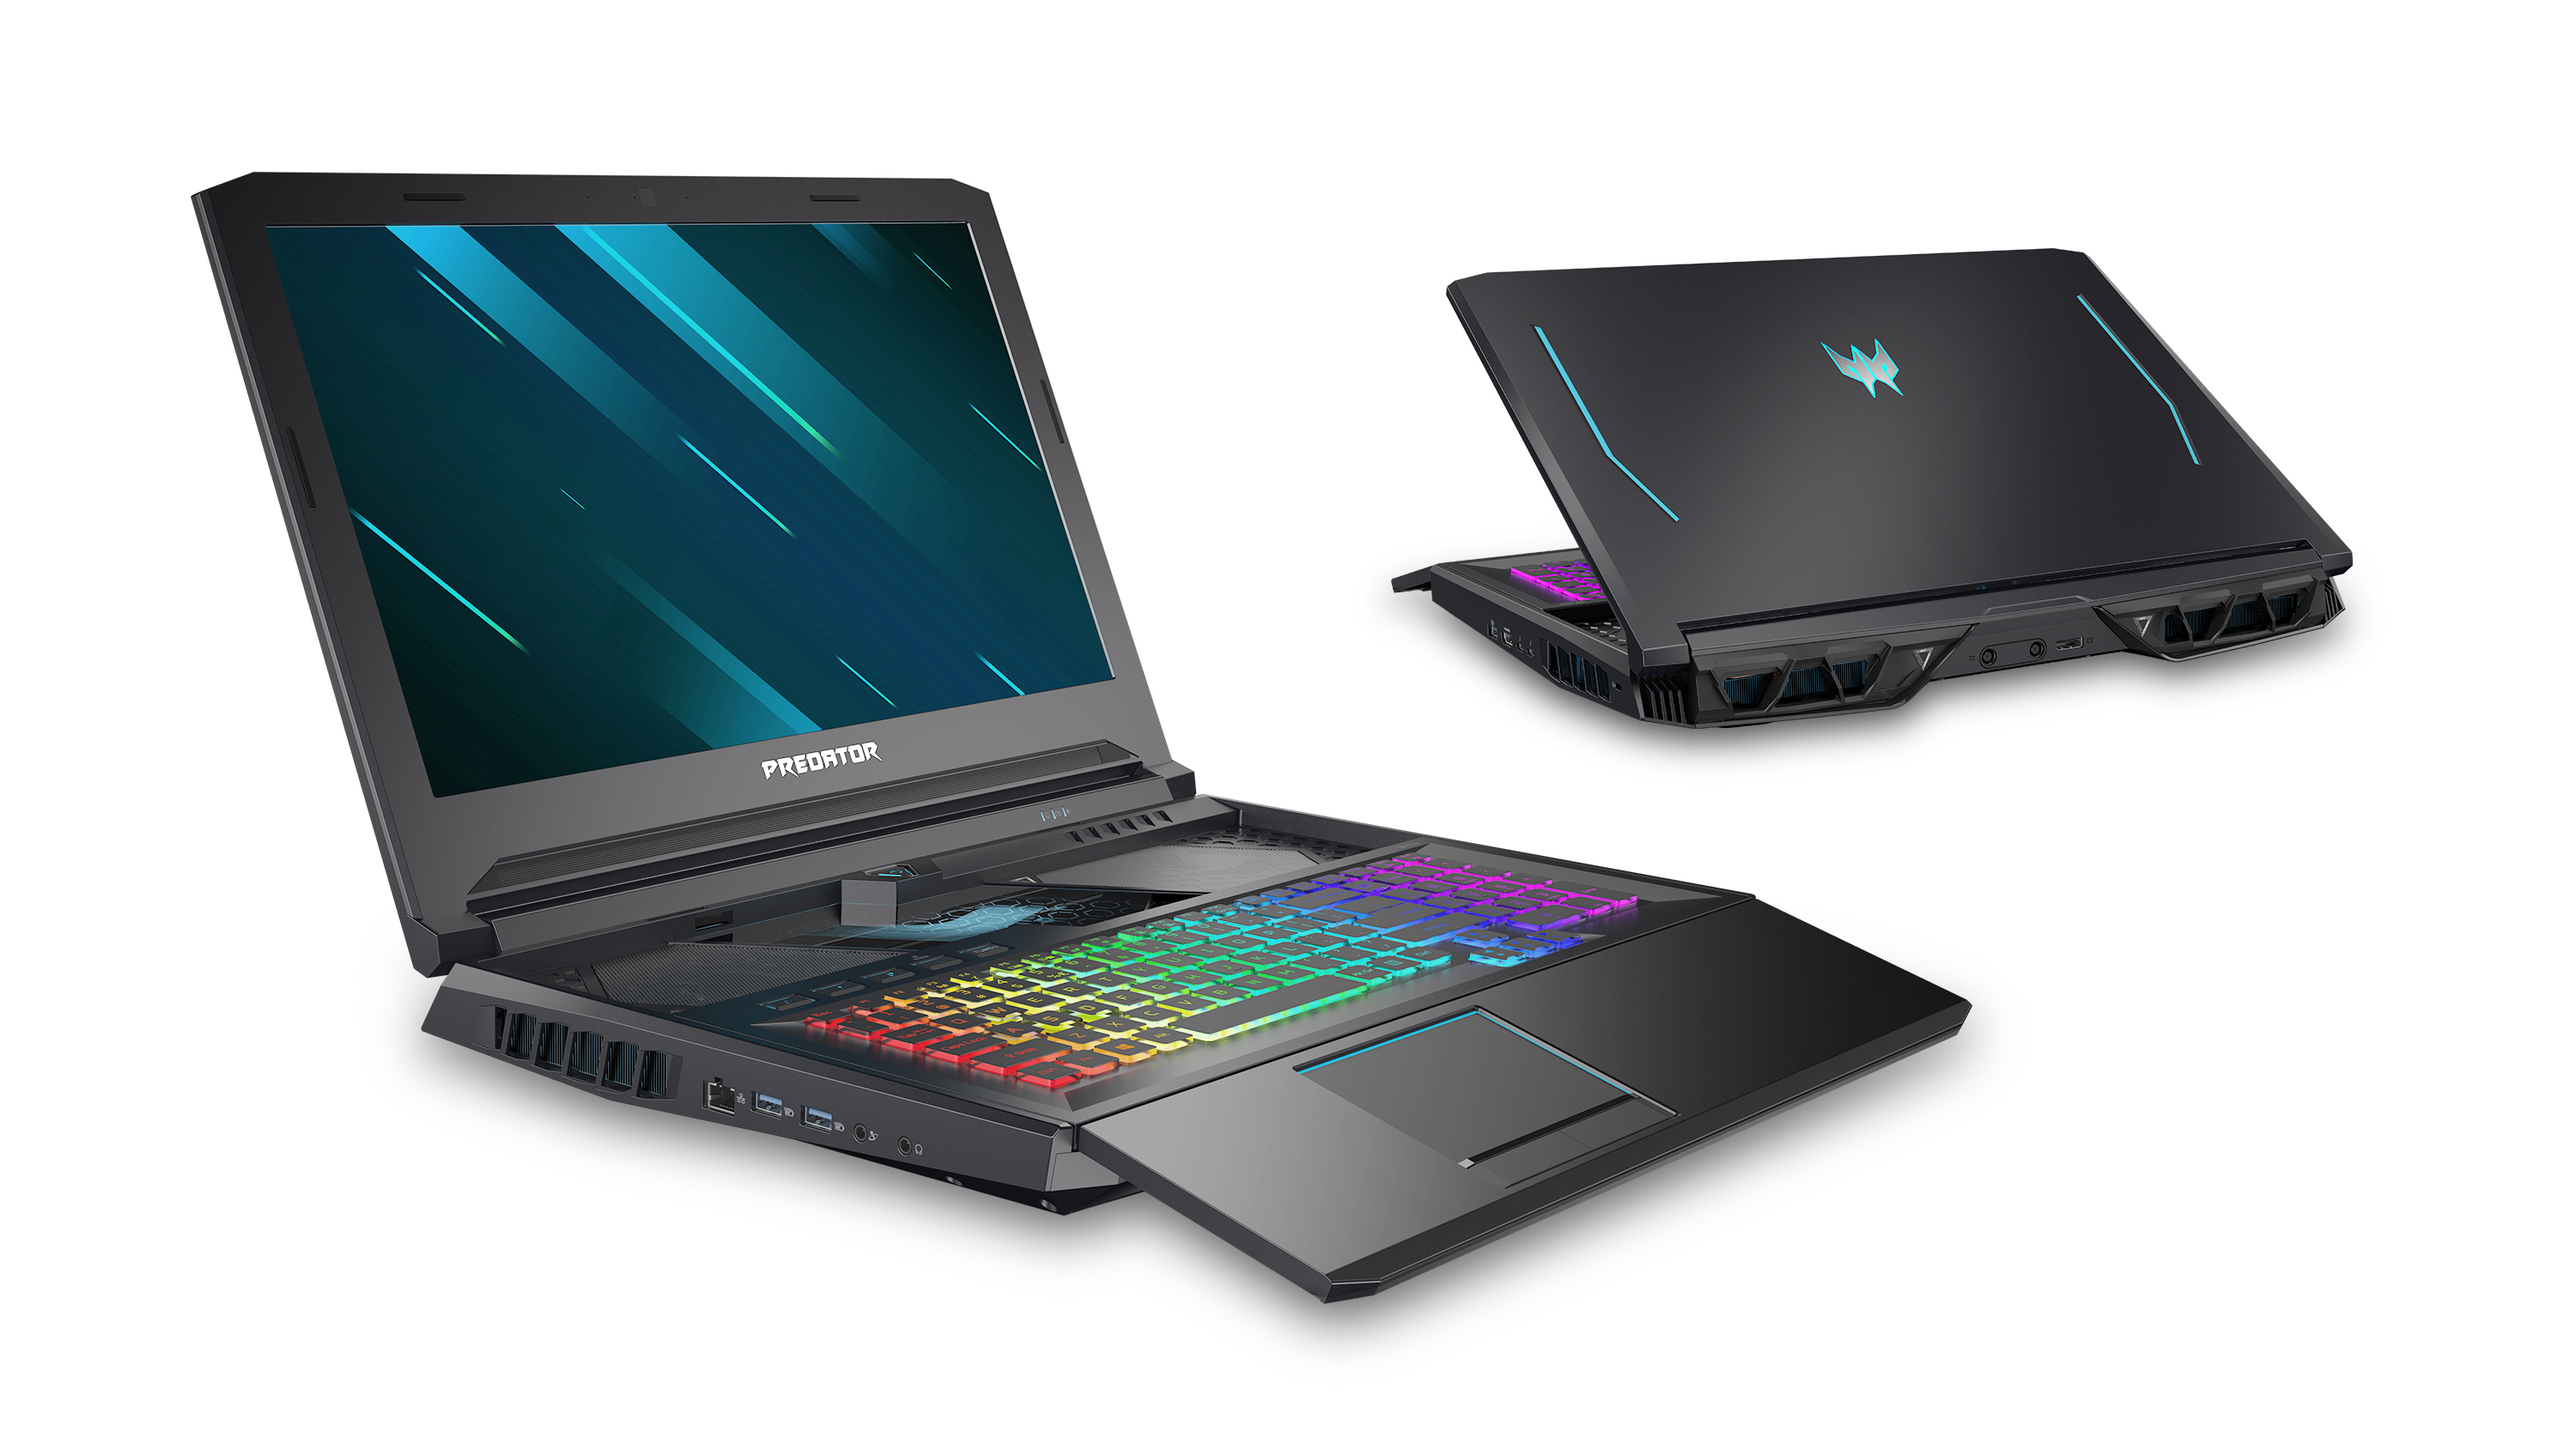 Acer Predator Helios The gaming laptop returns up an Intel Core i9-10980HK, an NVIDIA GeForce RTX 2080 SUPER GPUs and faster RAM - NotebookCheck.net News